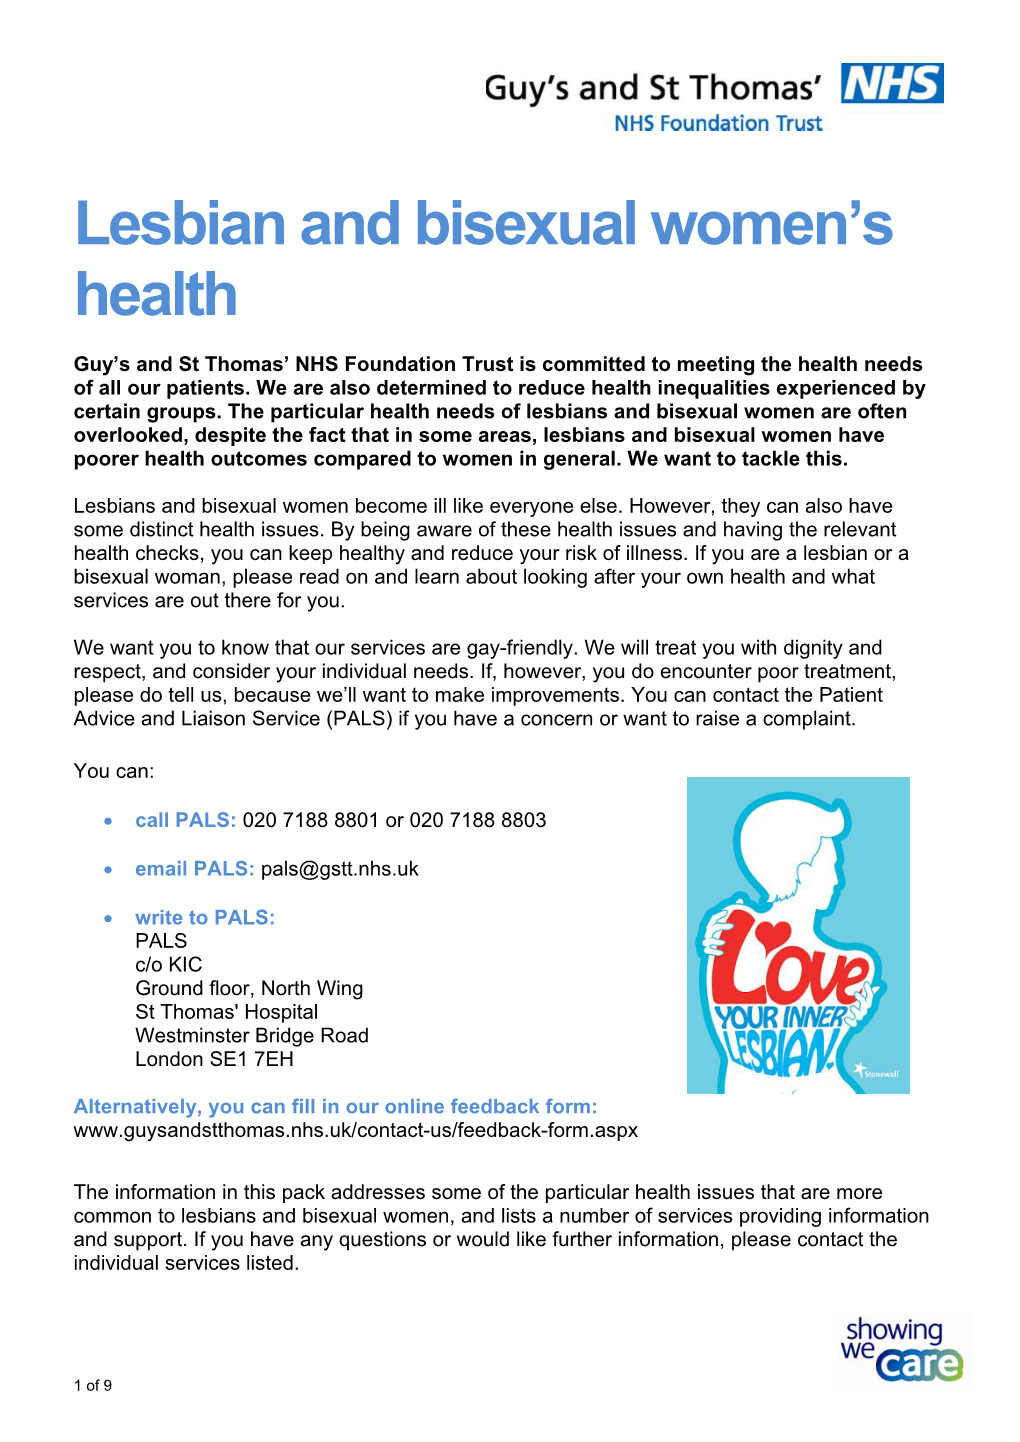 Lesbian and Bisexual Women's Health